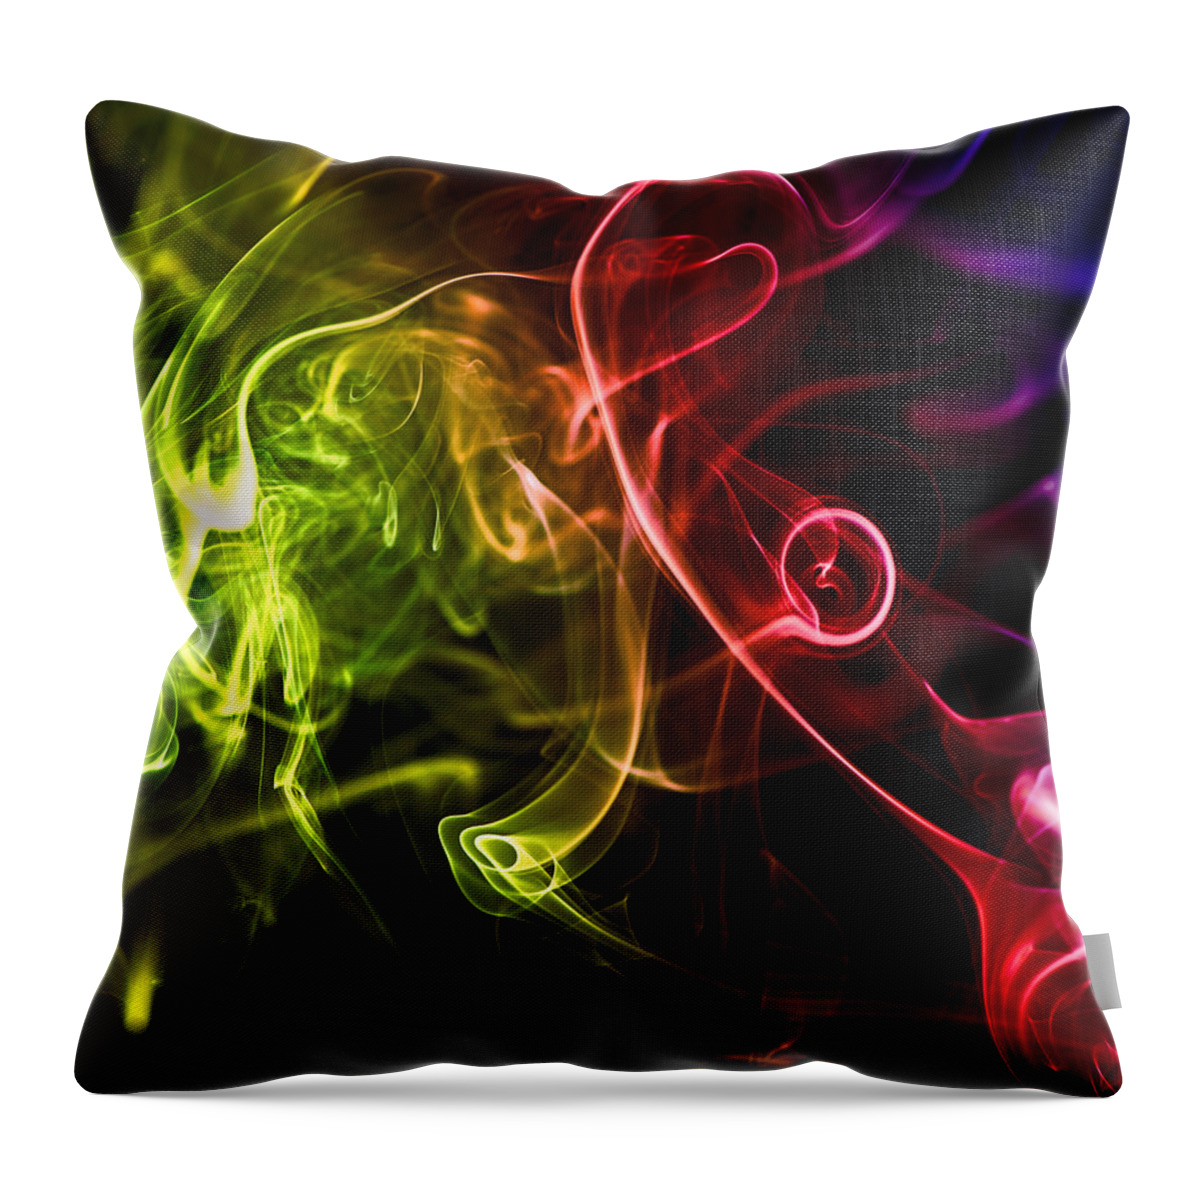 Smoke Throw Pillow featuring the photograph Rainbow Smoke by Lawrence Knutsson